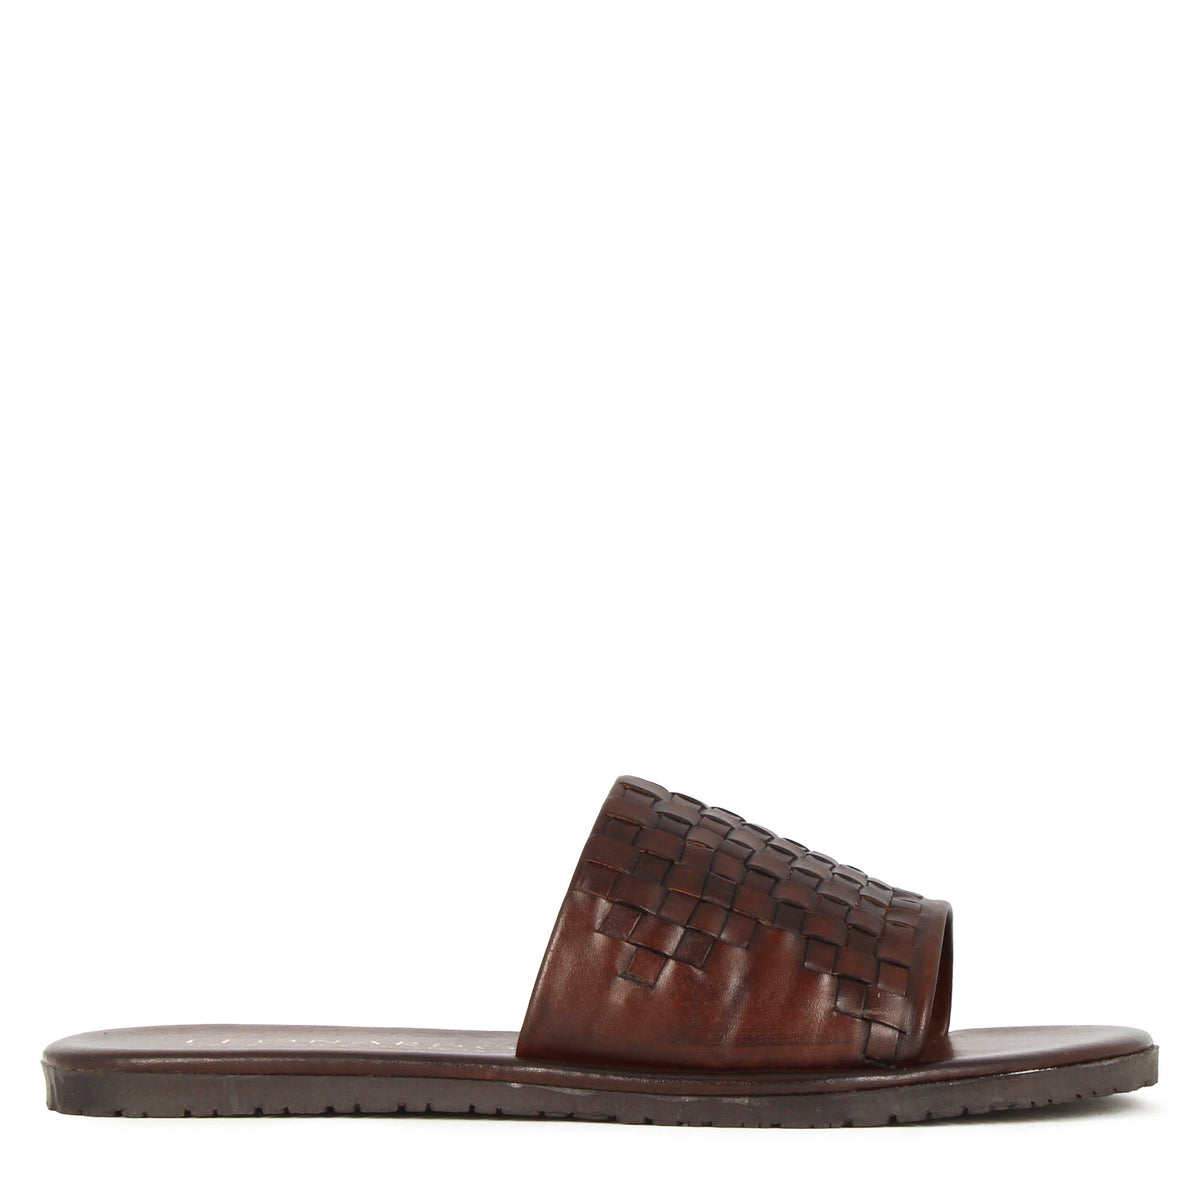 Men's slide sandal with brown woven leather band